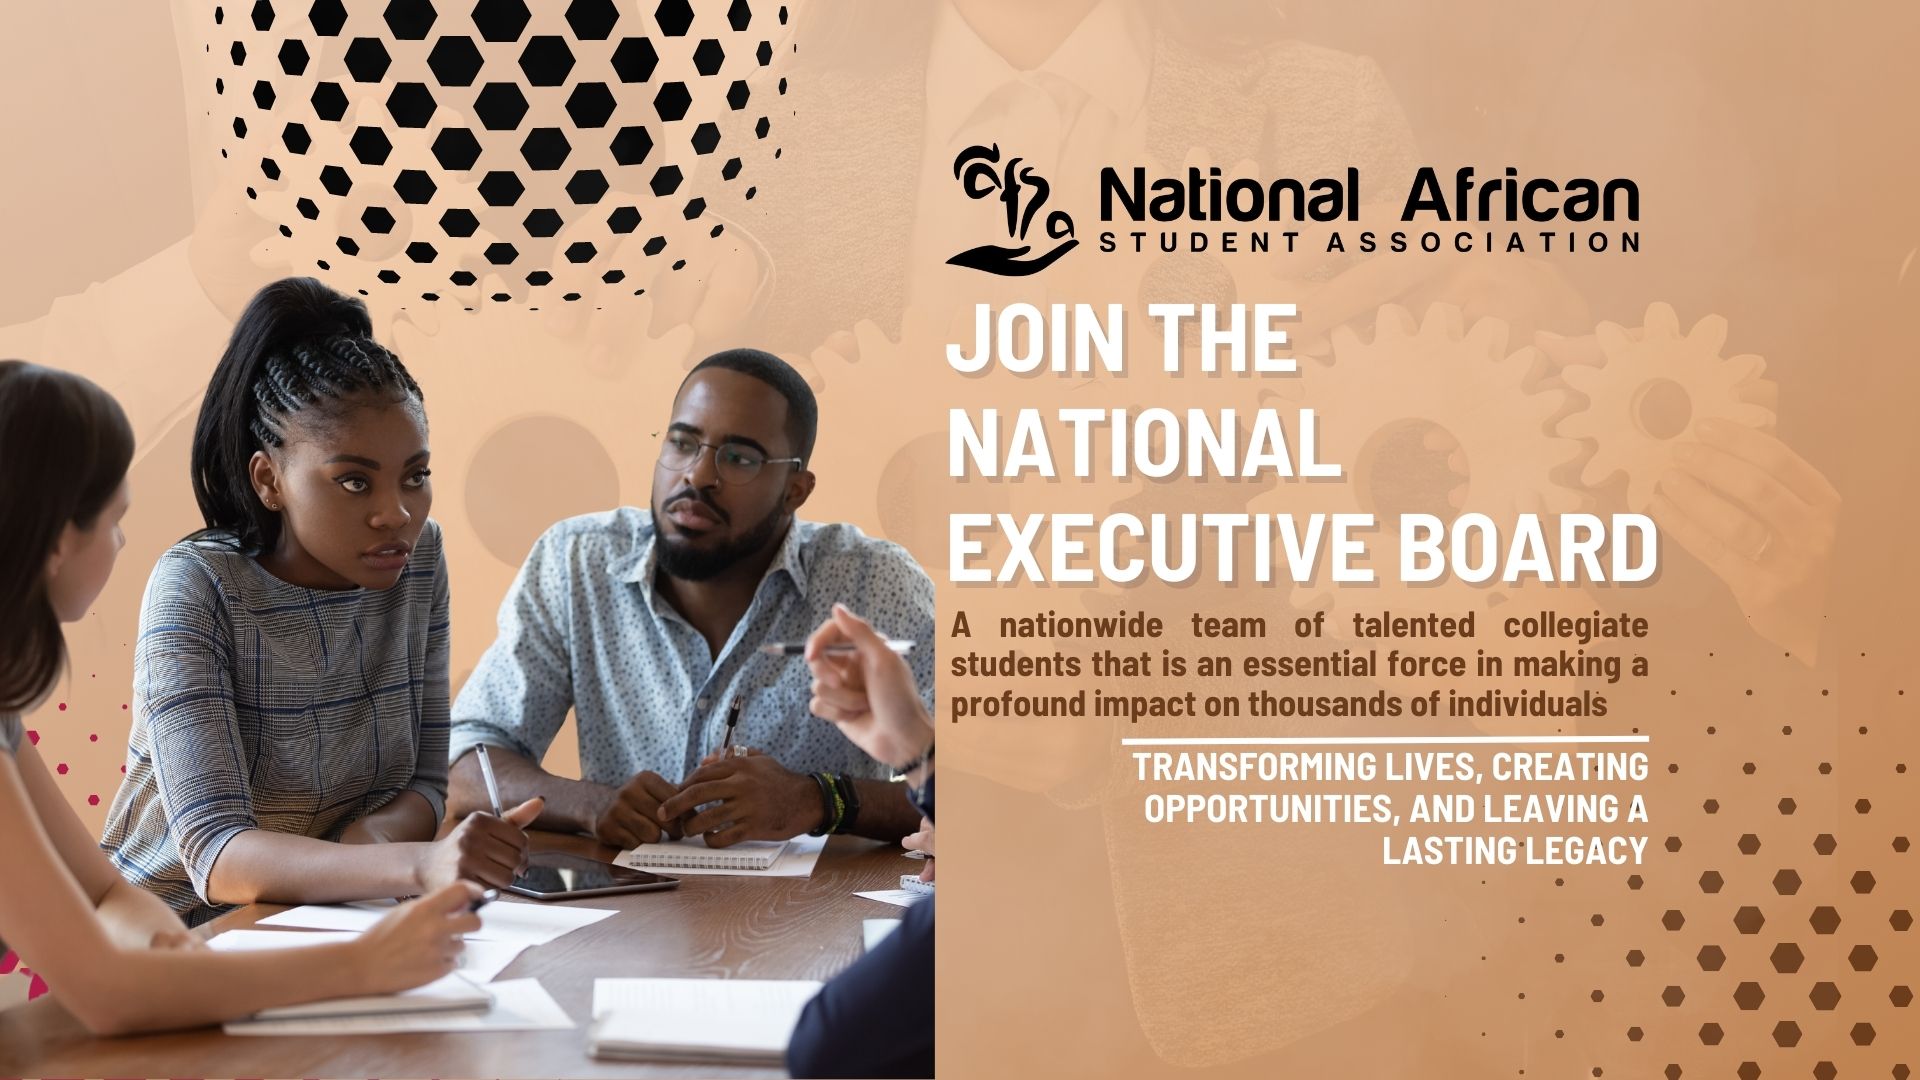 National African Student Association Executive Board - APPLICATION